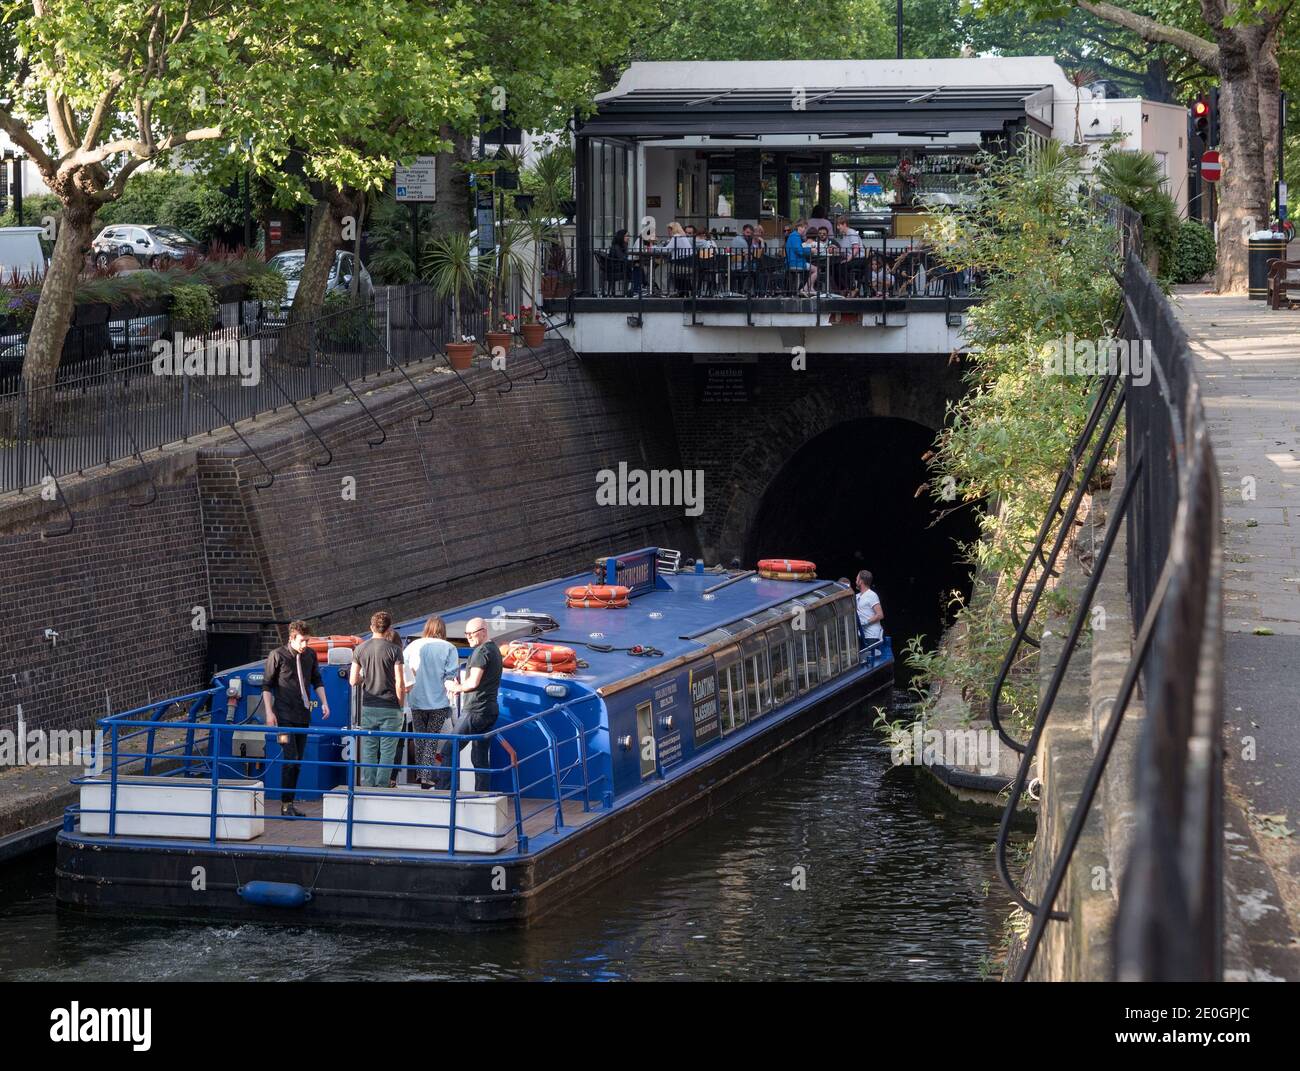 The Electric Barge, a party boat based in London's Little Venice Basin enters a tunnel under the Edgeware Road on the Regent's Canal in London, Englan Stock Photo